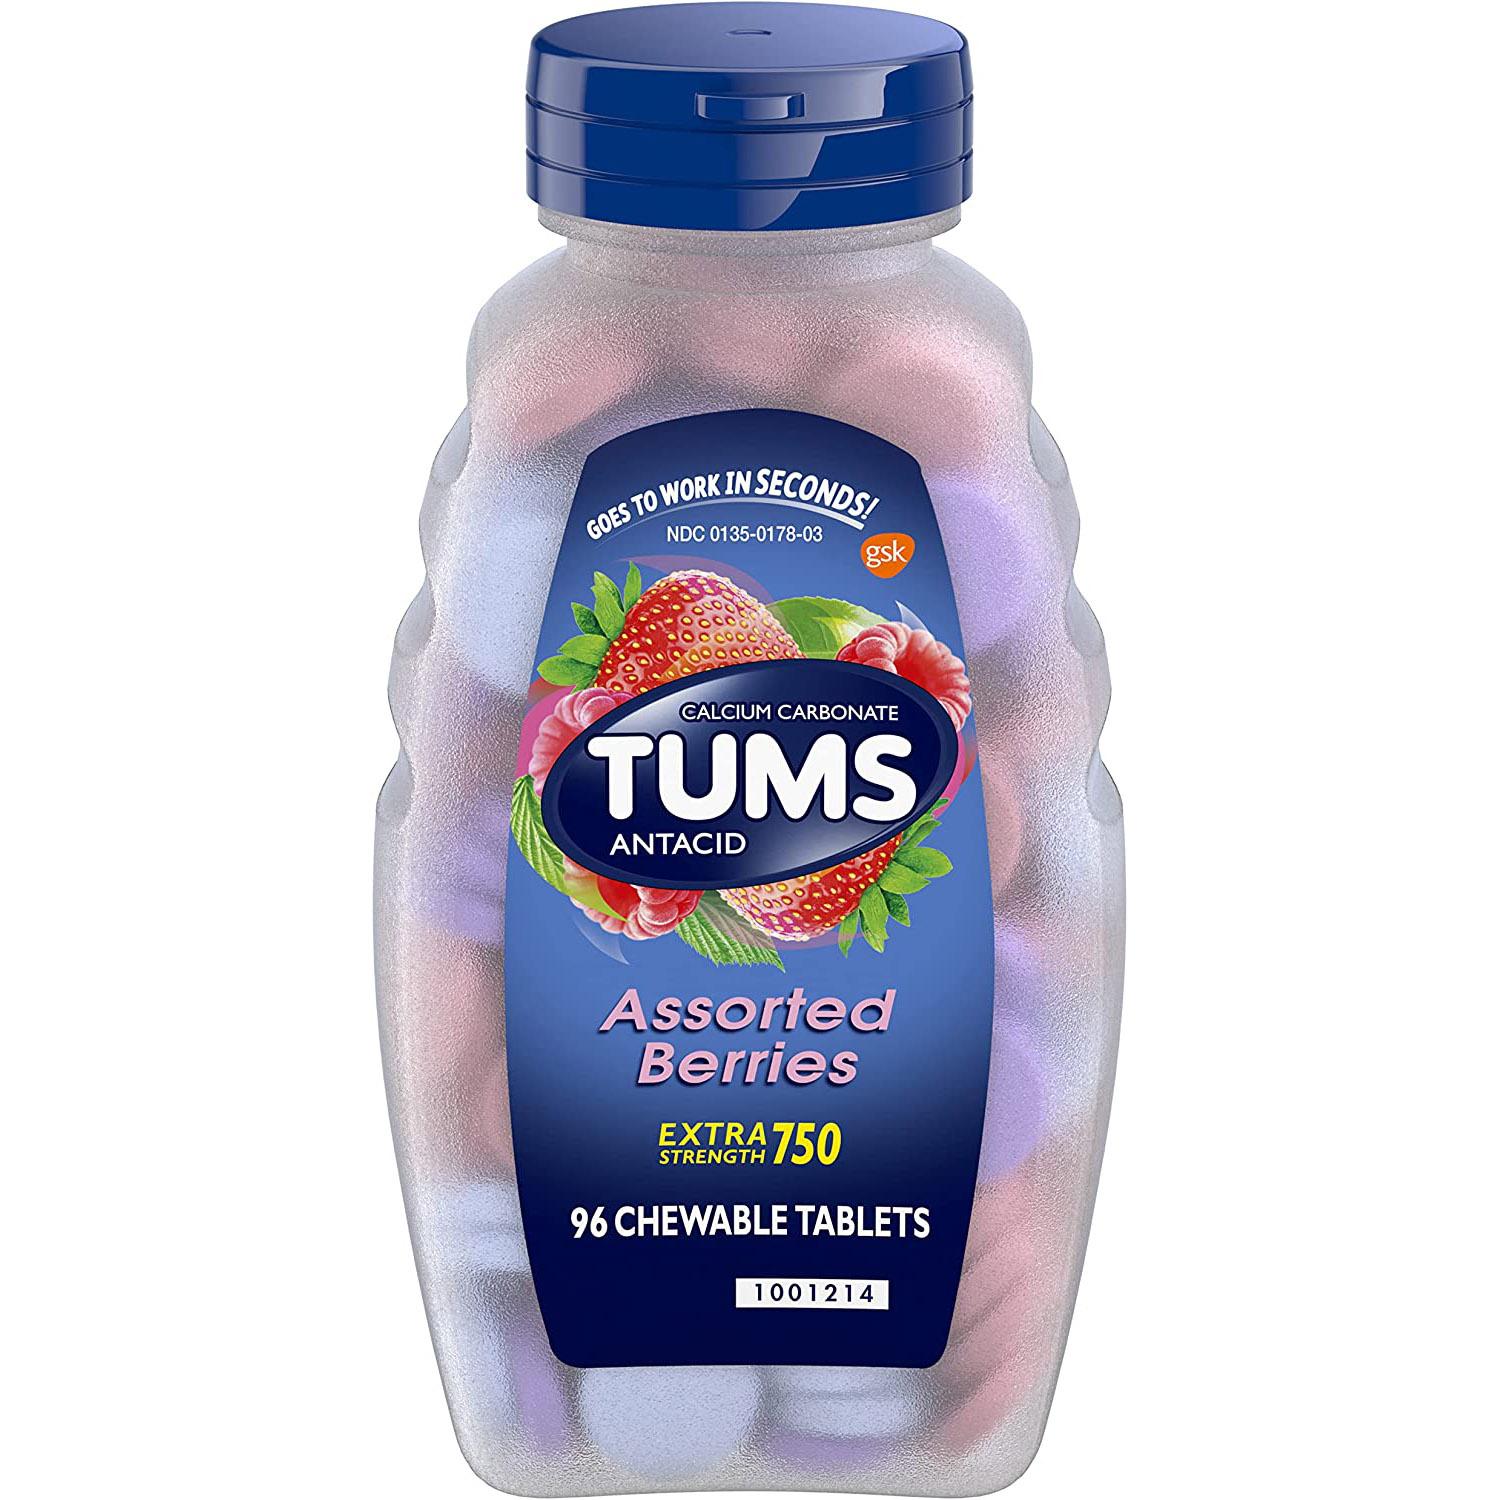 TUMS Extra Strength Antacid Chewable Tablets 96 Pack for $2.58 Shipped